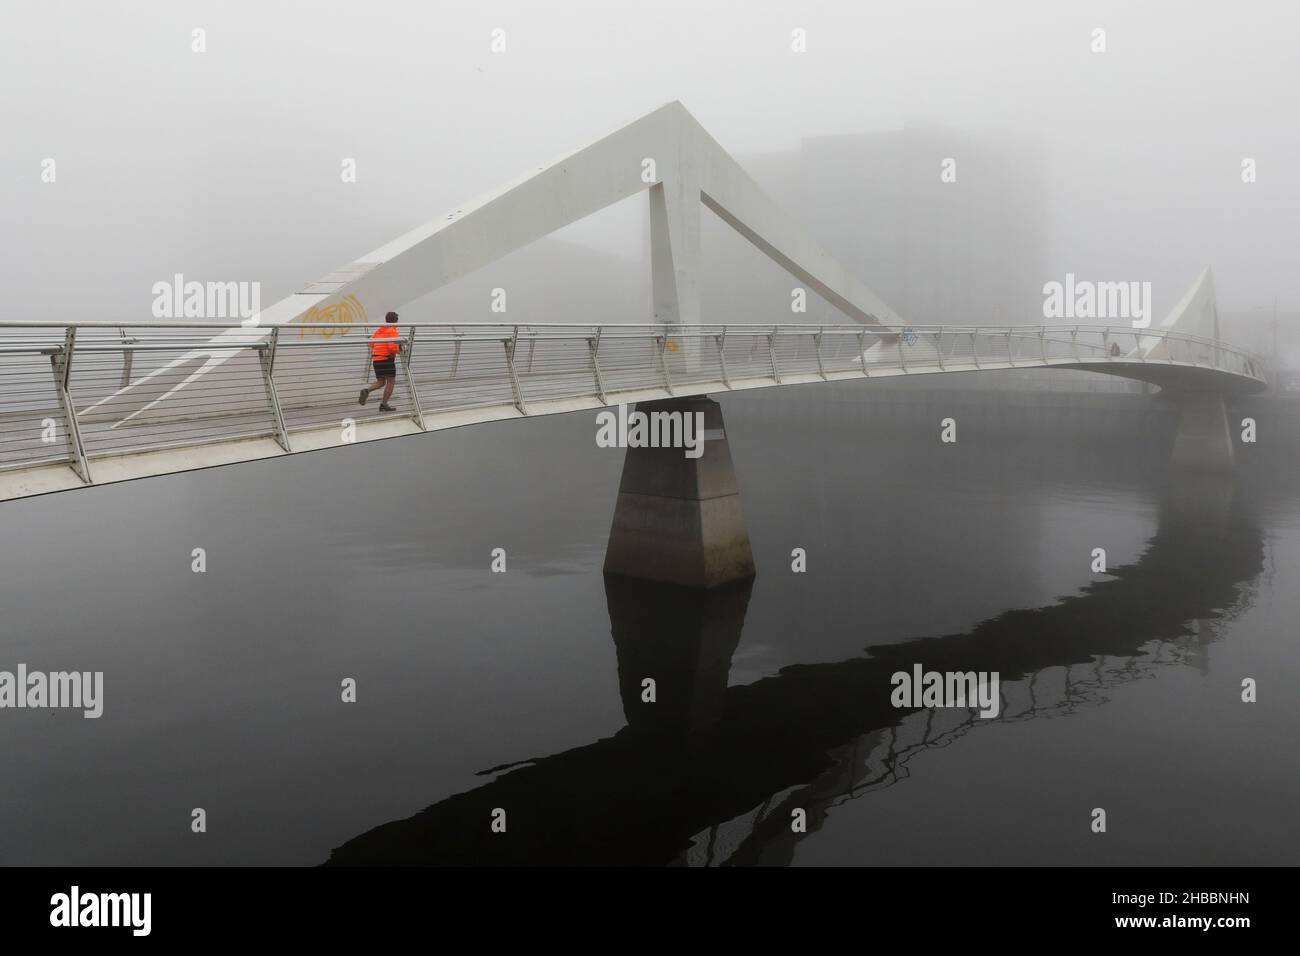 Glasgow, UK. 18th Dec, 2021. Early morning commuters were treated to a frosty mist that created a surreal landscape over the River Clyde and its bridges, particularly the Tradeston Bridge (also known locally as the Squinty Bridge) and the Portland Suspension Bridge. Credit: Findlay/Alamy Live News Stock Photo